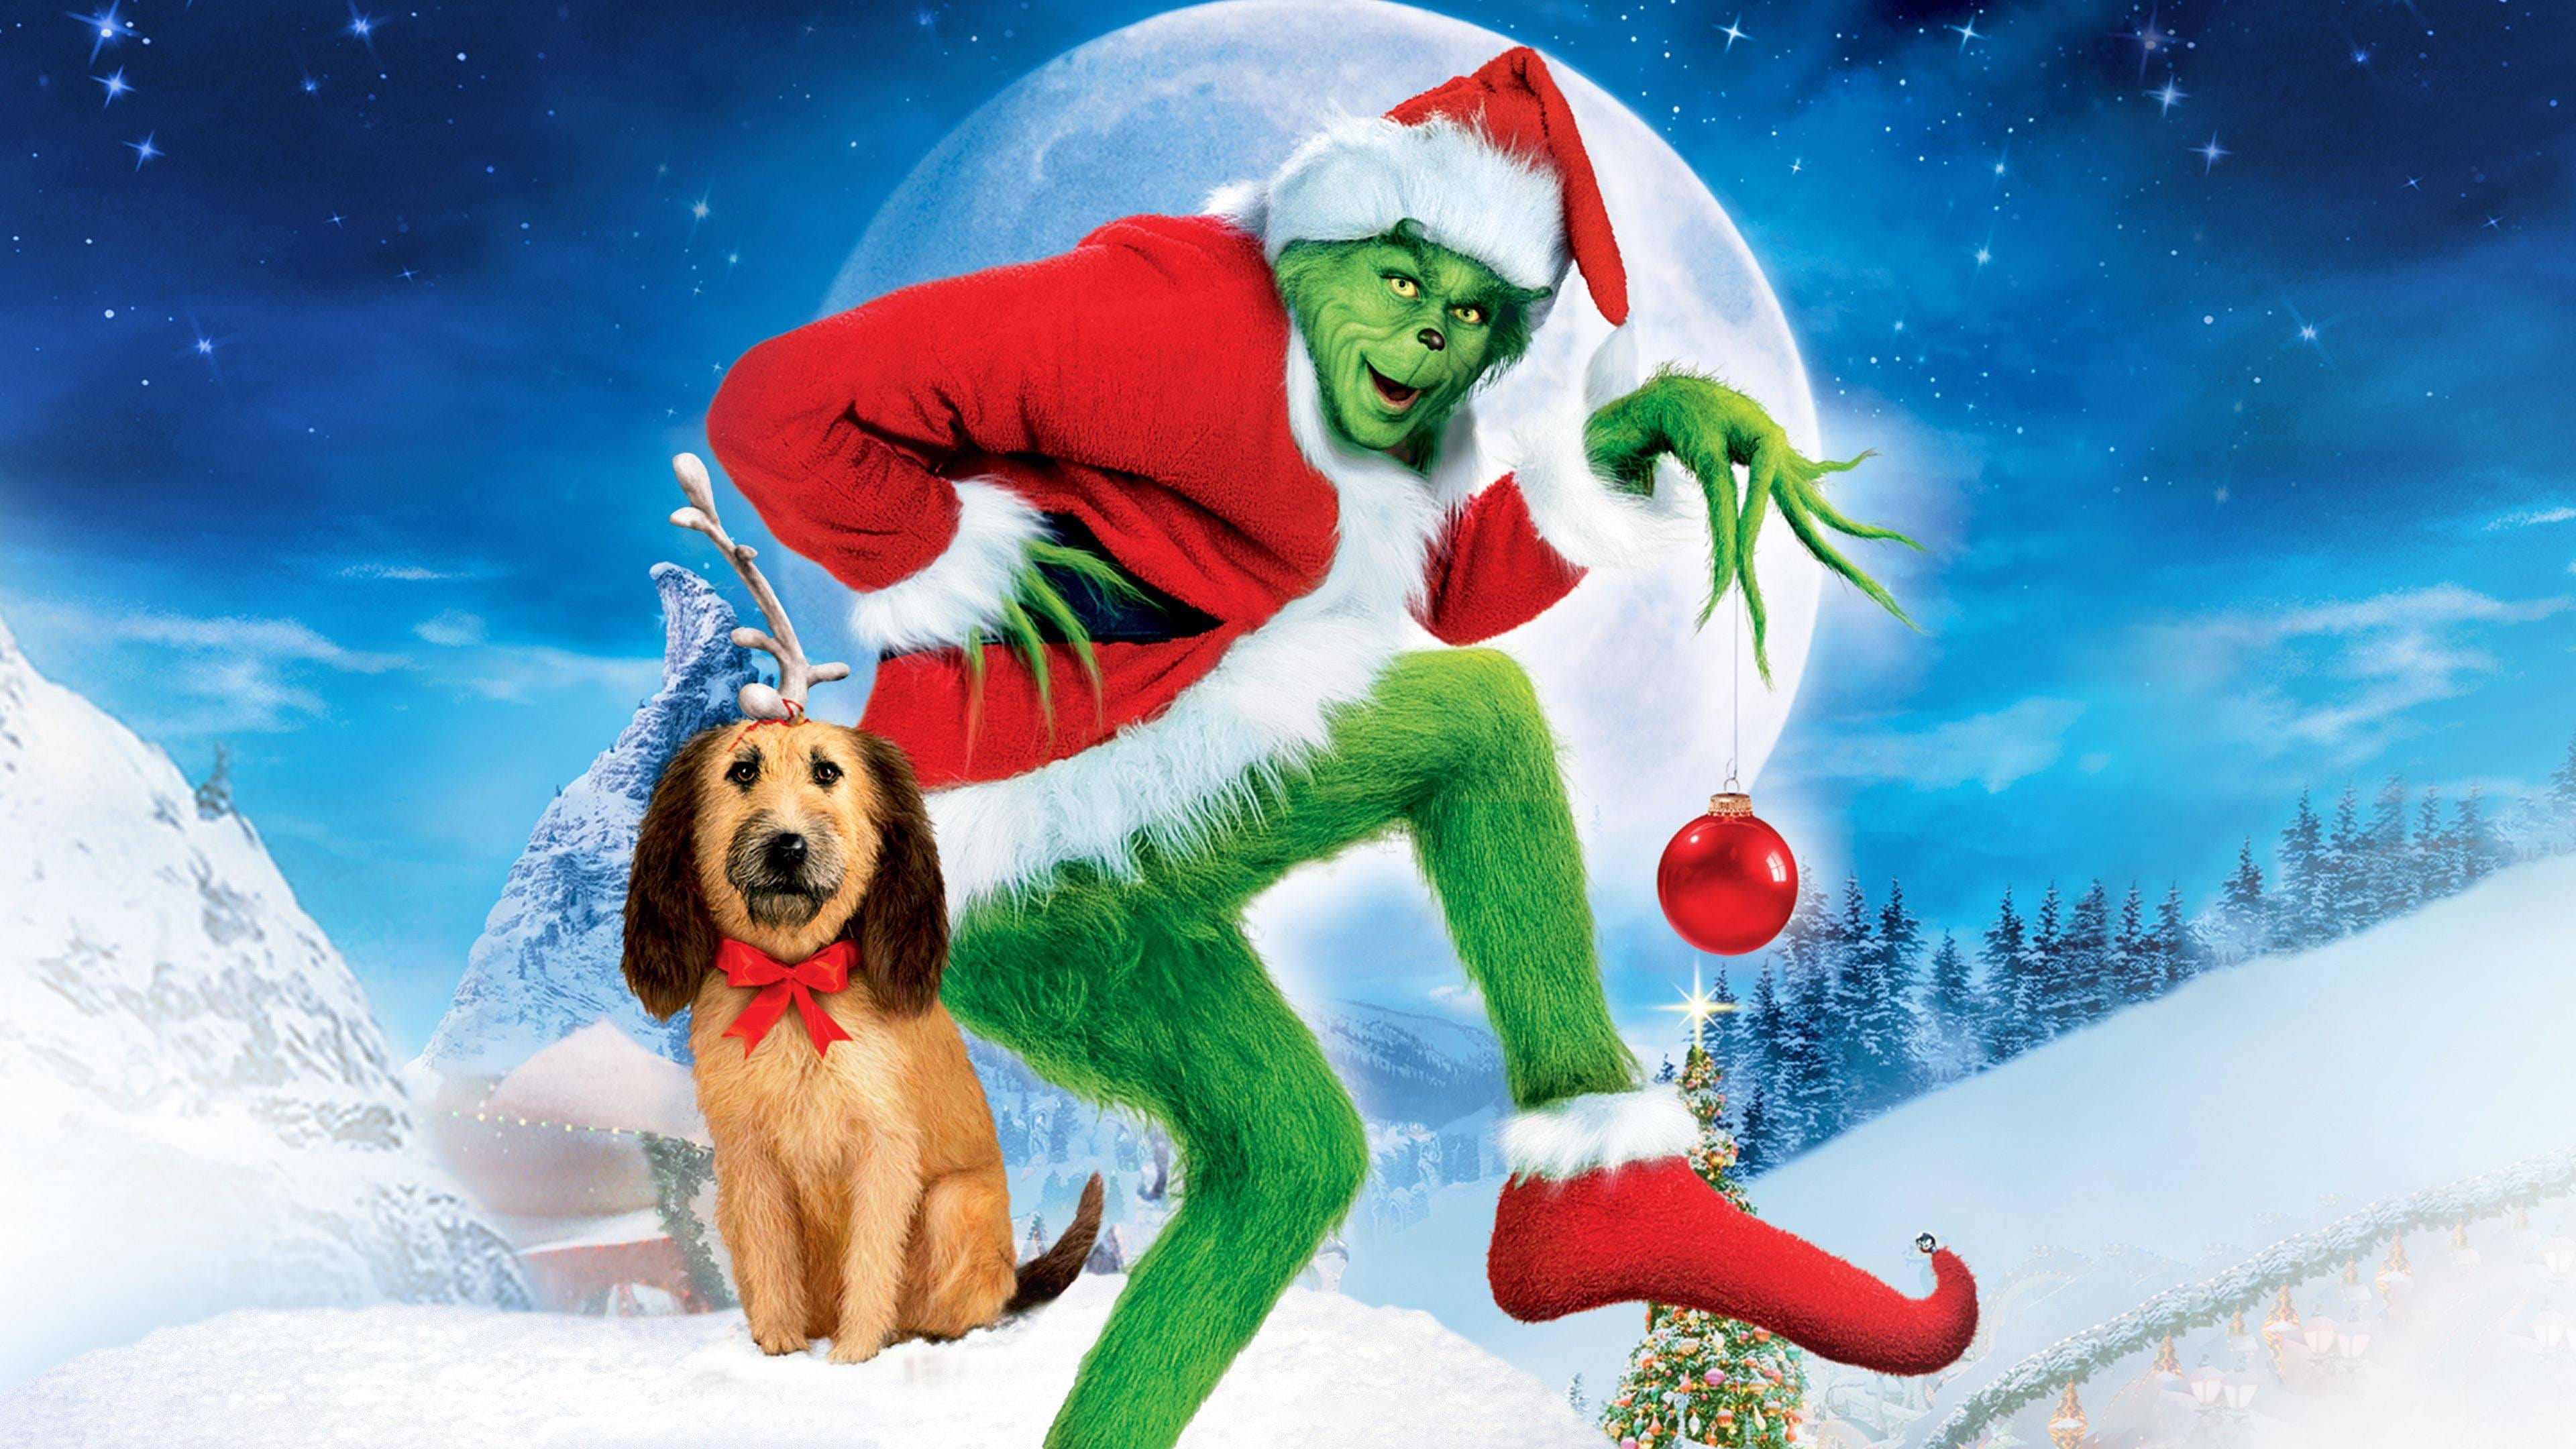 How the Grinch Stole Christmas Watch full movie online Diobox